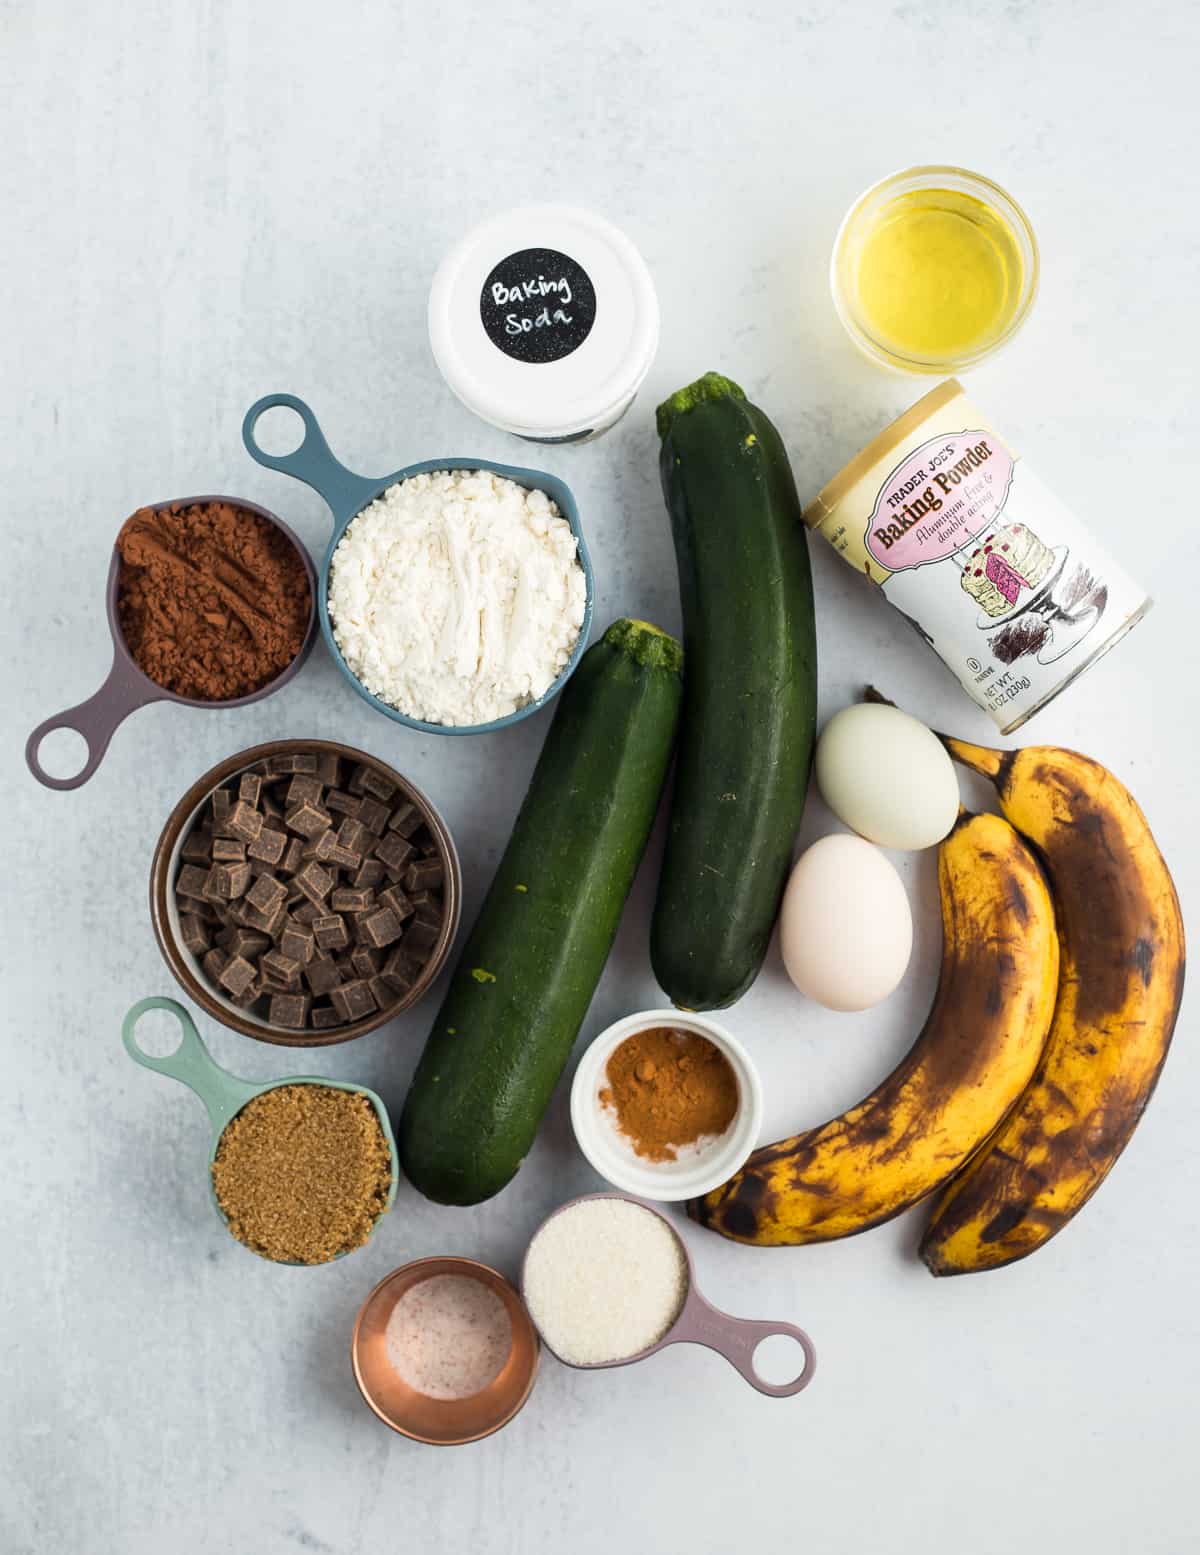 zucchini, bananas, eggs, chocolate chips, and other ingredients on a grey board.